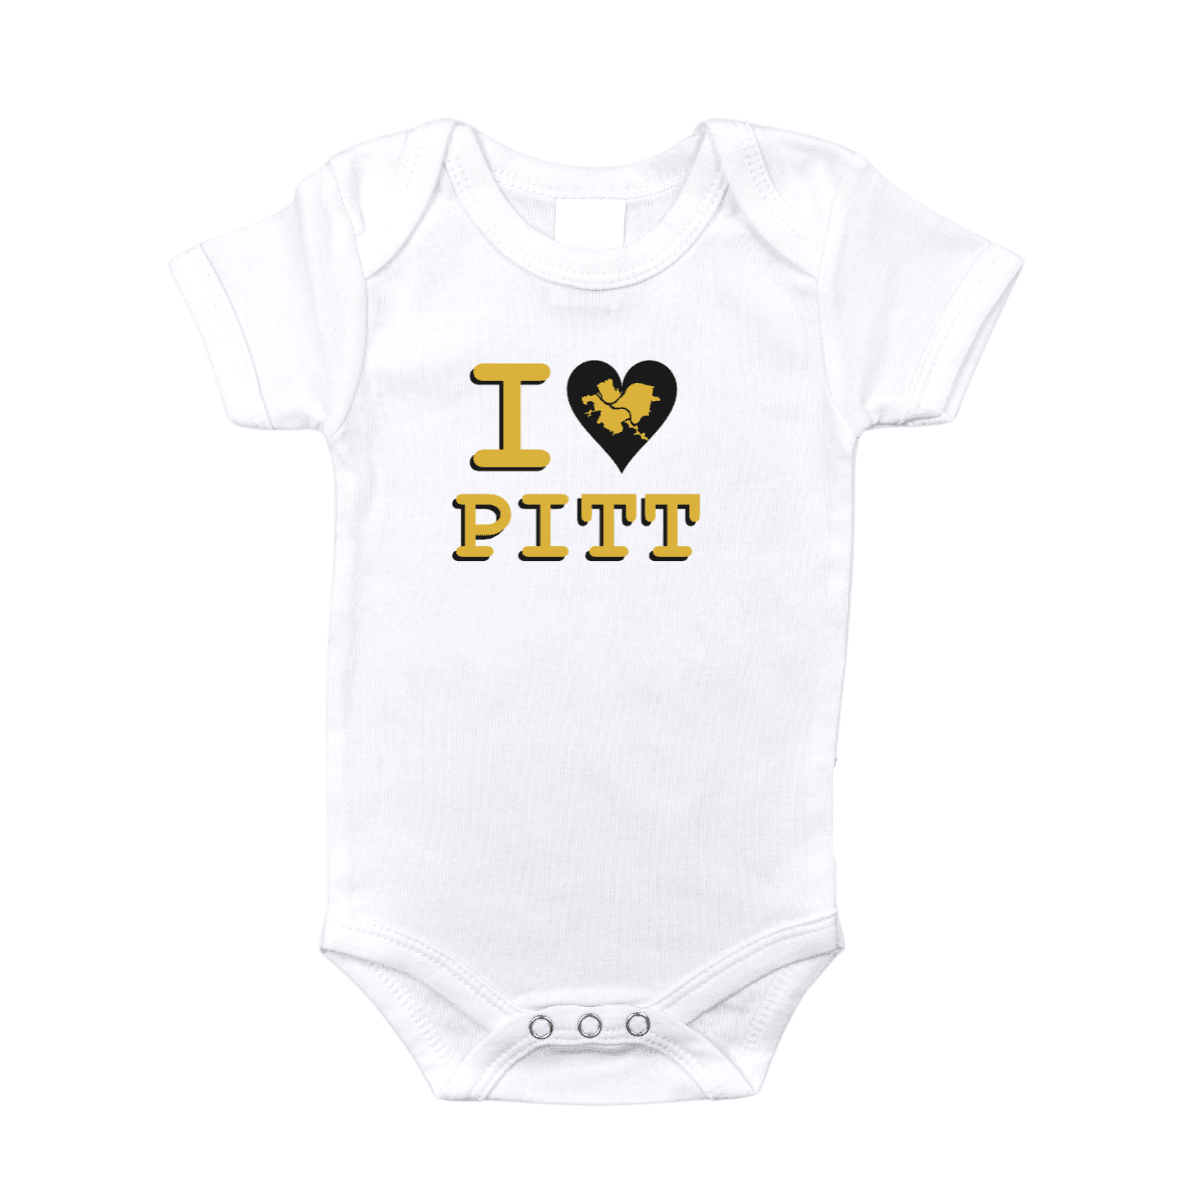 White baby onesie with "I Love Pitt" and a blue heart, celebrating Pittsburgh, displayed on a wooden background.